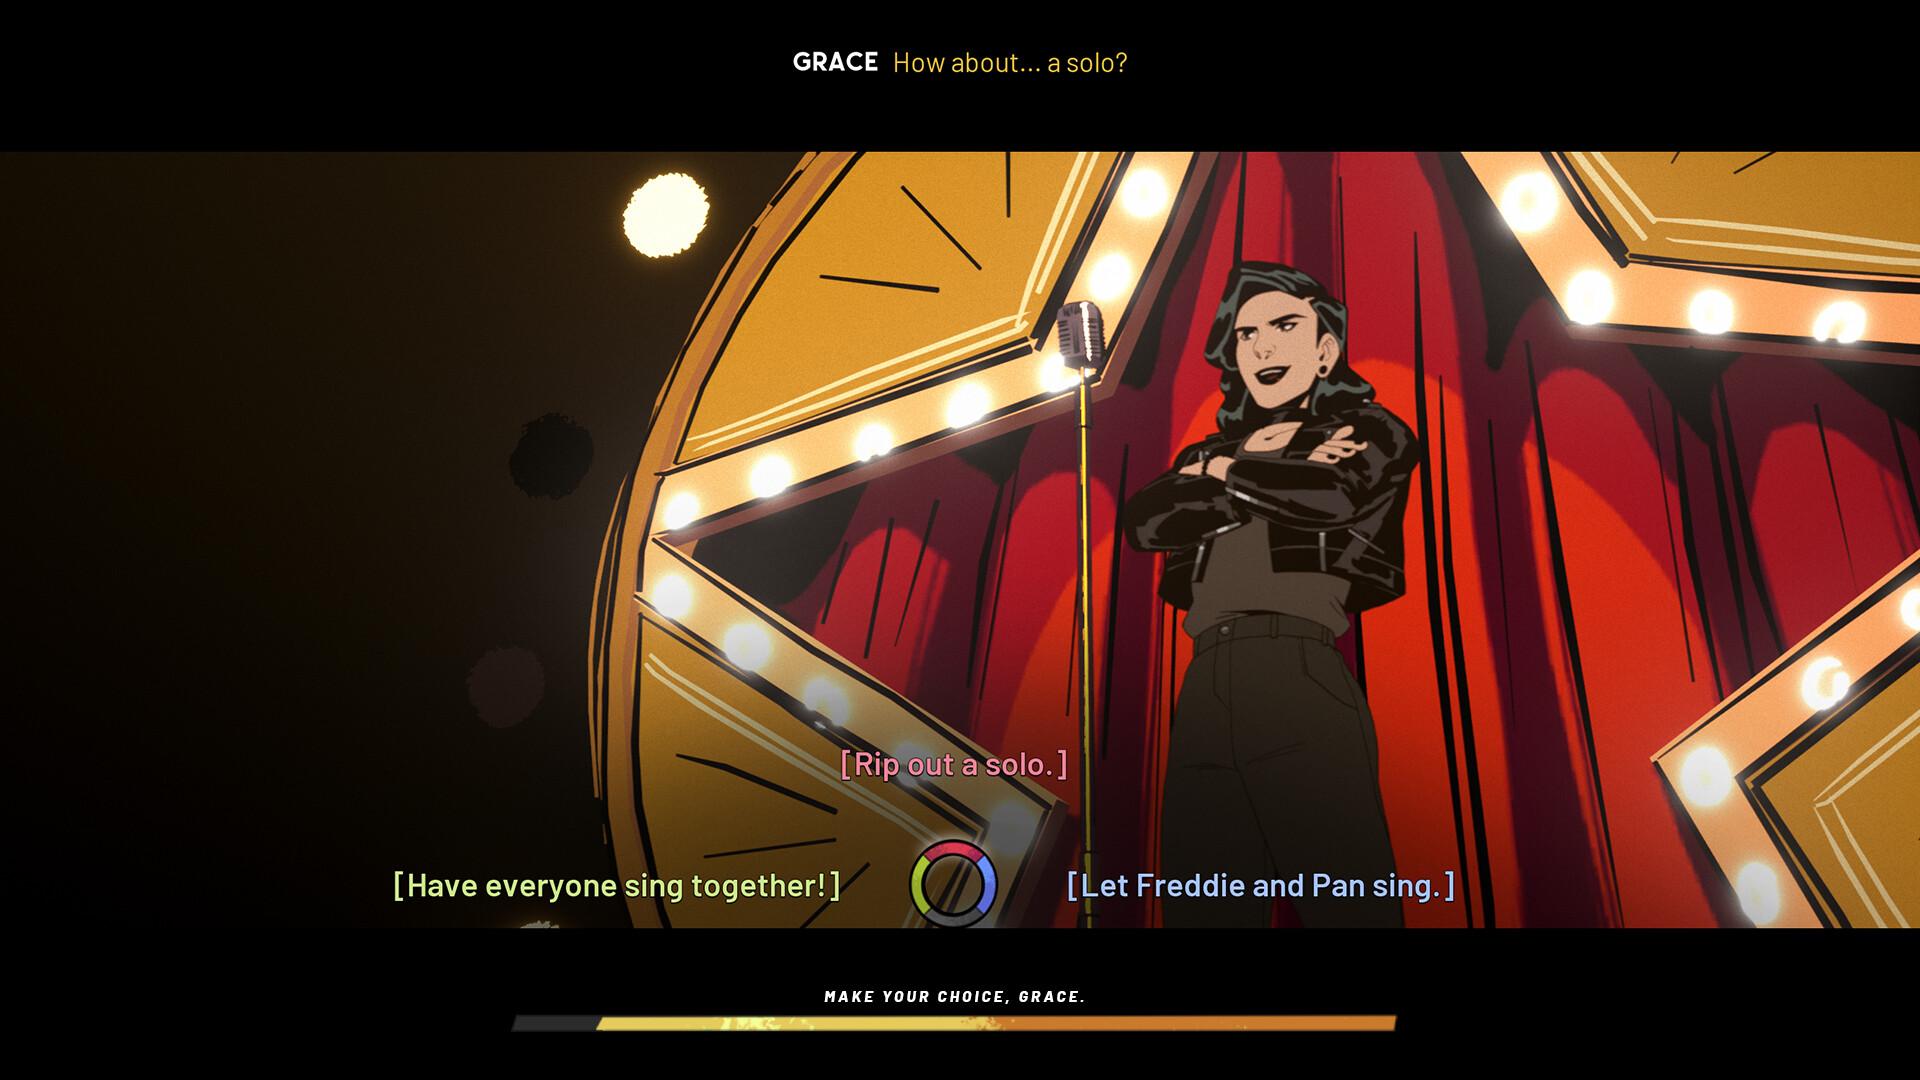 Screenshot №1 from game Stray Gods: The Roleplaying Musical